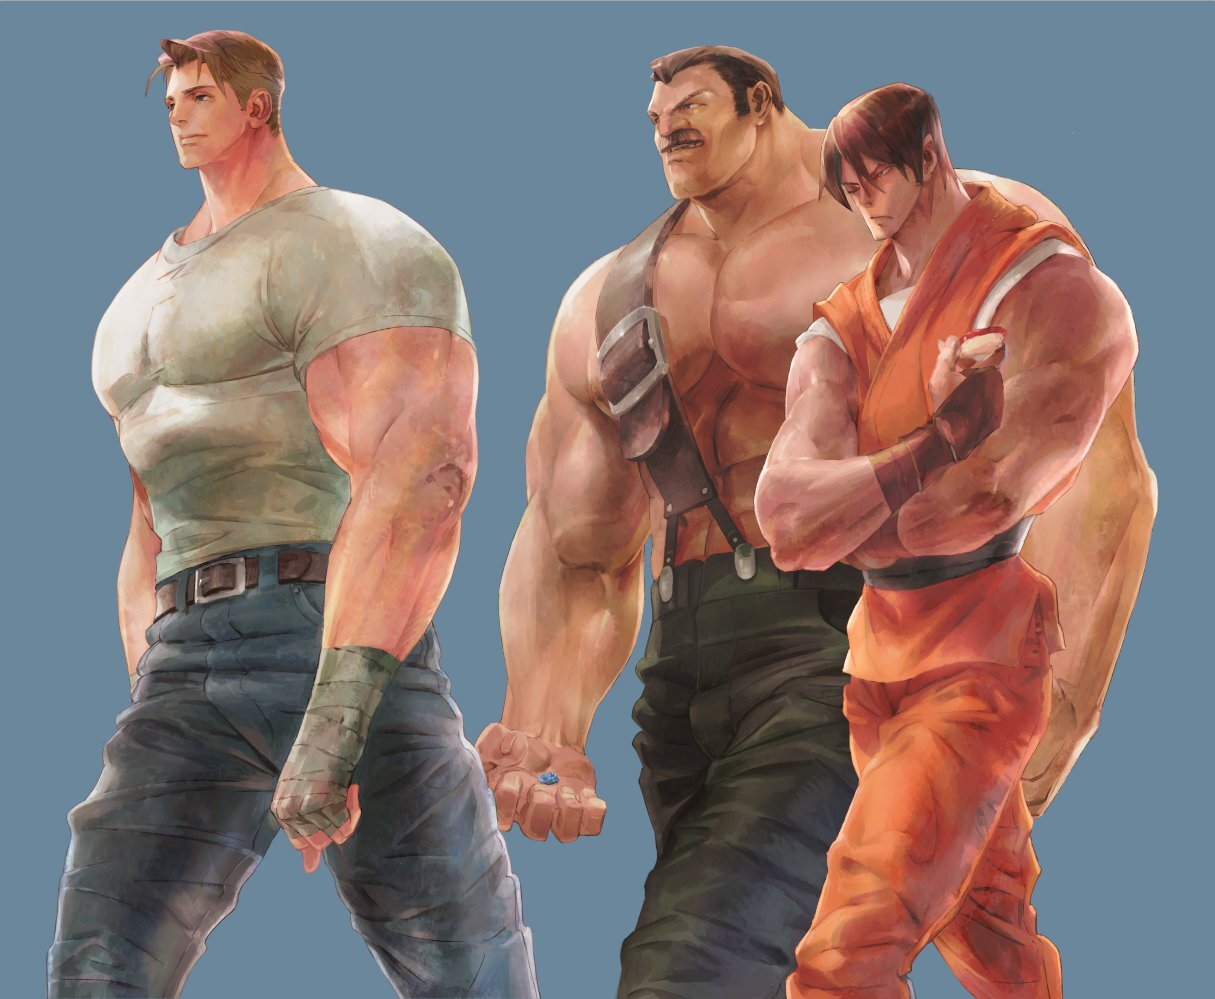 Rumor Street Fighter 6, Power Stone Remake, and Final Fight Remake